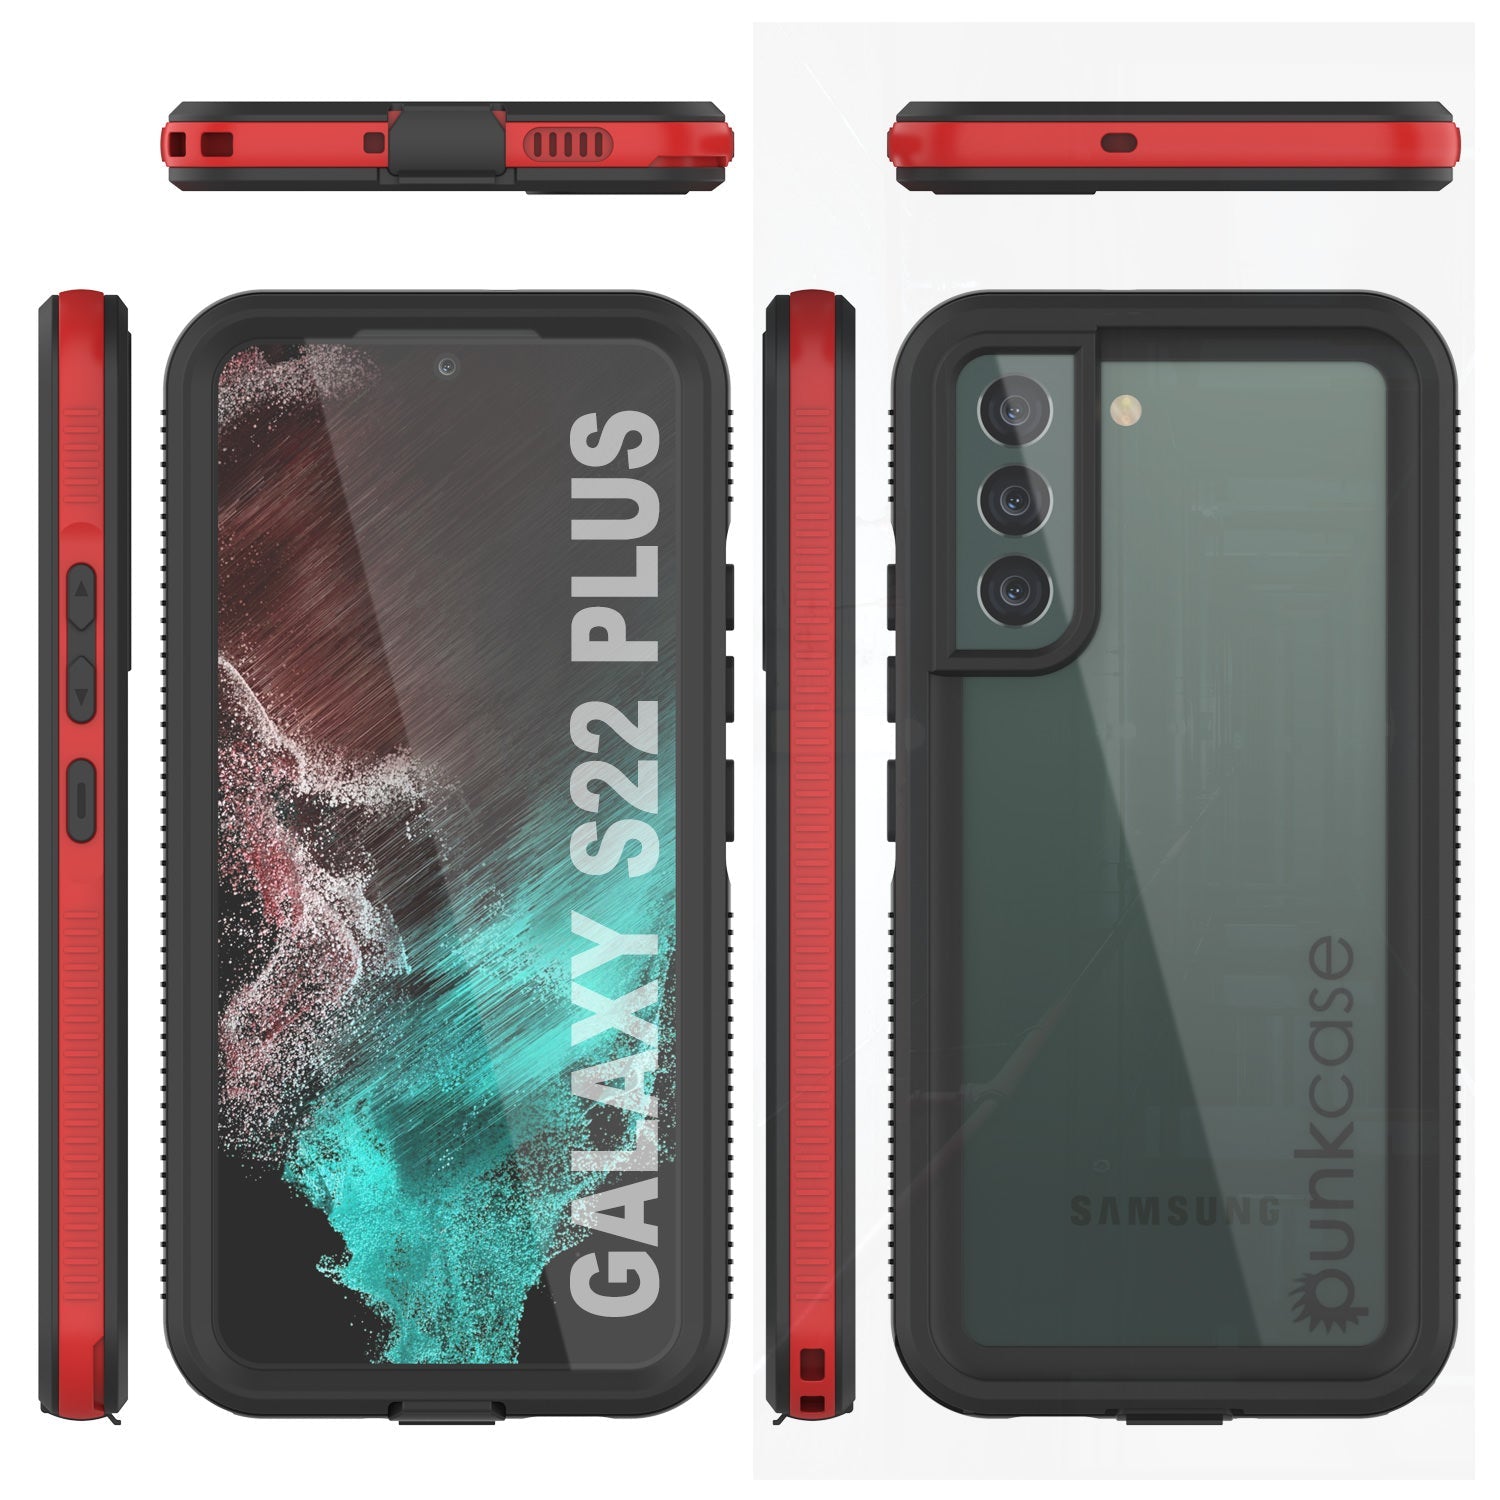 Galaxy S22+ Plus Waterproof Case PunkCase Ultimato Red Thin 6.6ft Underwater IP68 Shock/Snow Proof [Red]